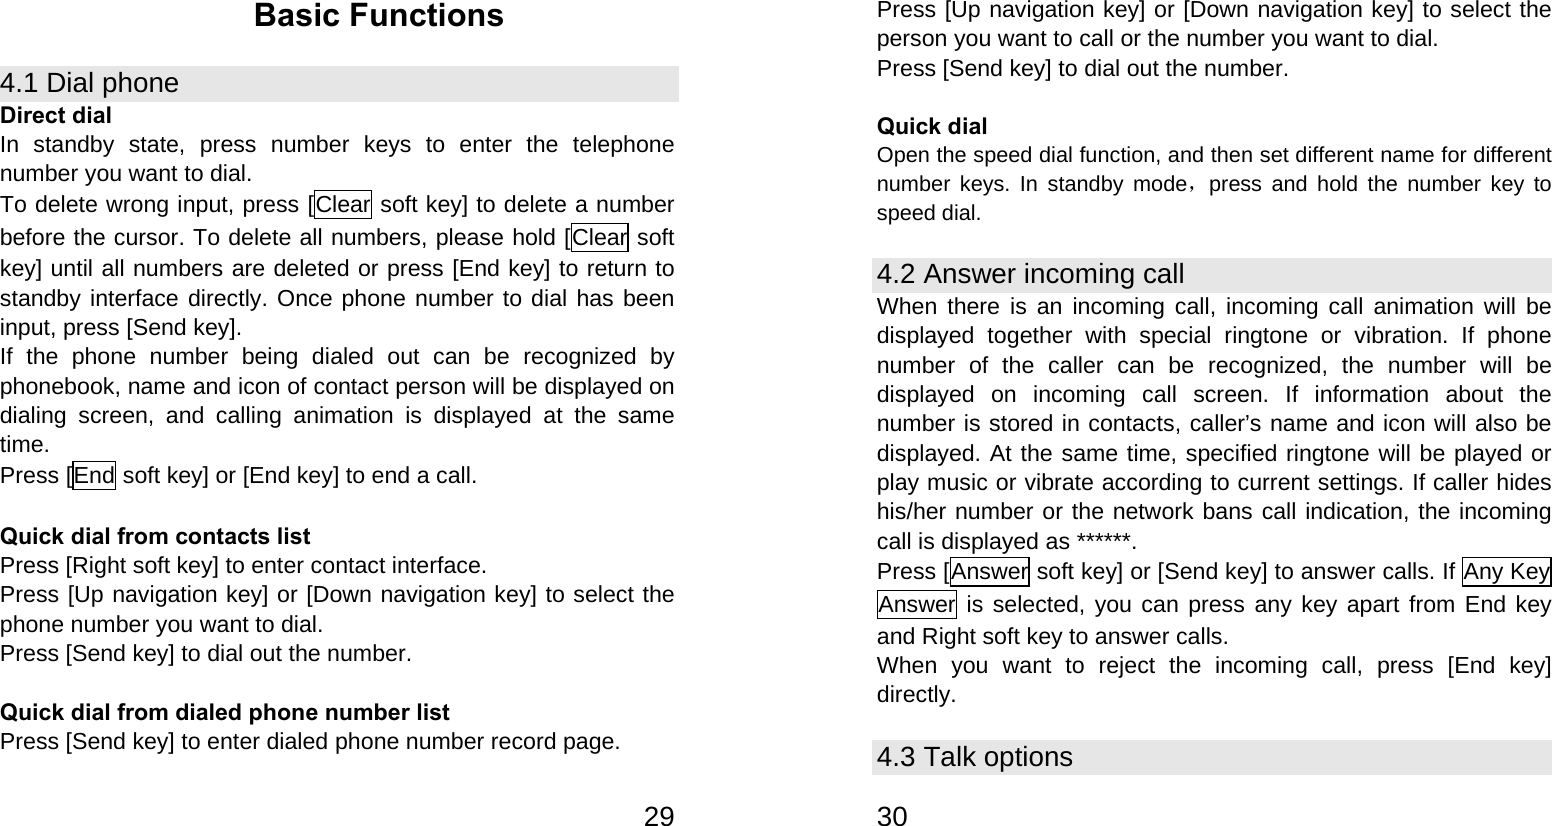   29Basic Functions 4.1 Dial phone Direct dial In standby state, press number keys to enter the telephone number you want to dial. To delete wrong input, press [Clear soft key] to delete a number before the cursor. To delete all numbers, please hold [Clear soft key] until all numbers are deleted or press [End key] to return to standby interface directly. Once phone number to dial has been input, press [Send key]. If the phone number being dialed out can be recognized by phonebook, name and icon of contact person will be displayed on dialing screen, and calling animation is displayed at the same time. Press [End soft key] or [End key] to end a call.  Quick dial from contacts list Press [Right soft key] to enter contact interface. Press [Up navigation key] or [Down navigation key] to select the phone number you want to dial. Press [Send key] to dial out the number.  Quick dial from dialed phone number list Press [Send key] to enter dialed phone number record page.   30Press [Up navigation key] or [Down navigation key] to select the person you want to call or the number you want to dial. Press [Send key] to dial out the number.  Quick dial Open the speed dial function, and then set different name for different number keys. In standby mode，press and hold the number key to speed dial. 4.2 Answer incoming call When there is an incoming call, incoming call animation will be displayed together with special ringtone or vibration. If phone number of the caller can be recognized, the number will be displayed on incoming call screen. If information about the number is stored in contacts, caller’s name and icon will also be displayed. At the same time, specified ringtone will be played or play music or vibrate according to current settings. If caller hides his/her number or the network bans call indication, the incoming call is displayed as ******. Press [Answer soft key] or [Send key] to answer calls. If Any Key Answer is selected, you can press any key apart from End key and Right soft key to answer calls. When you want to reject the incoming call, press [End key] directly. 4.3 Talk options 